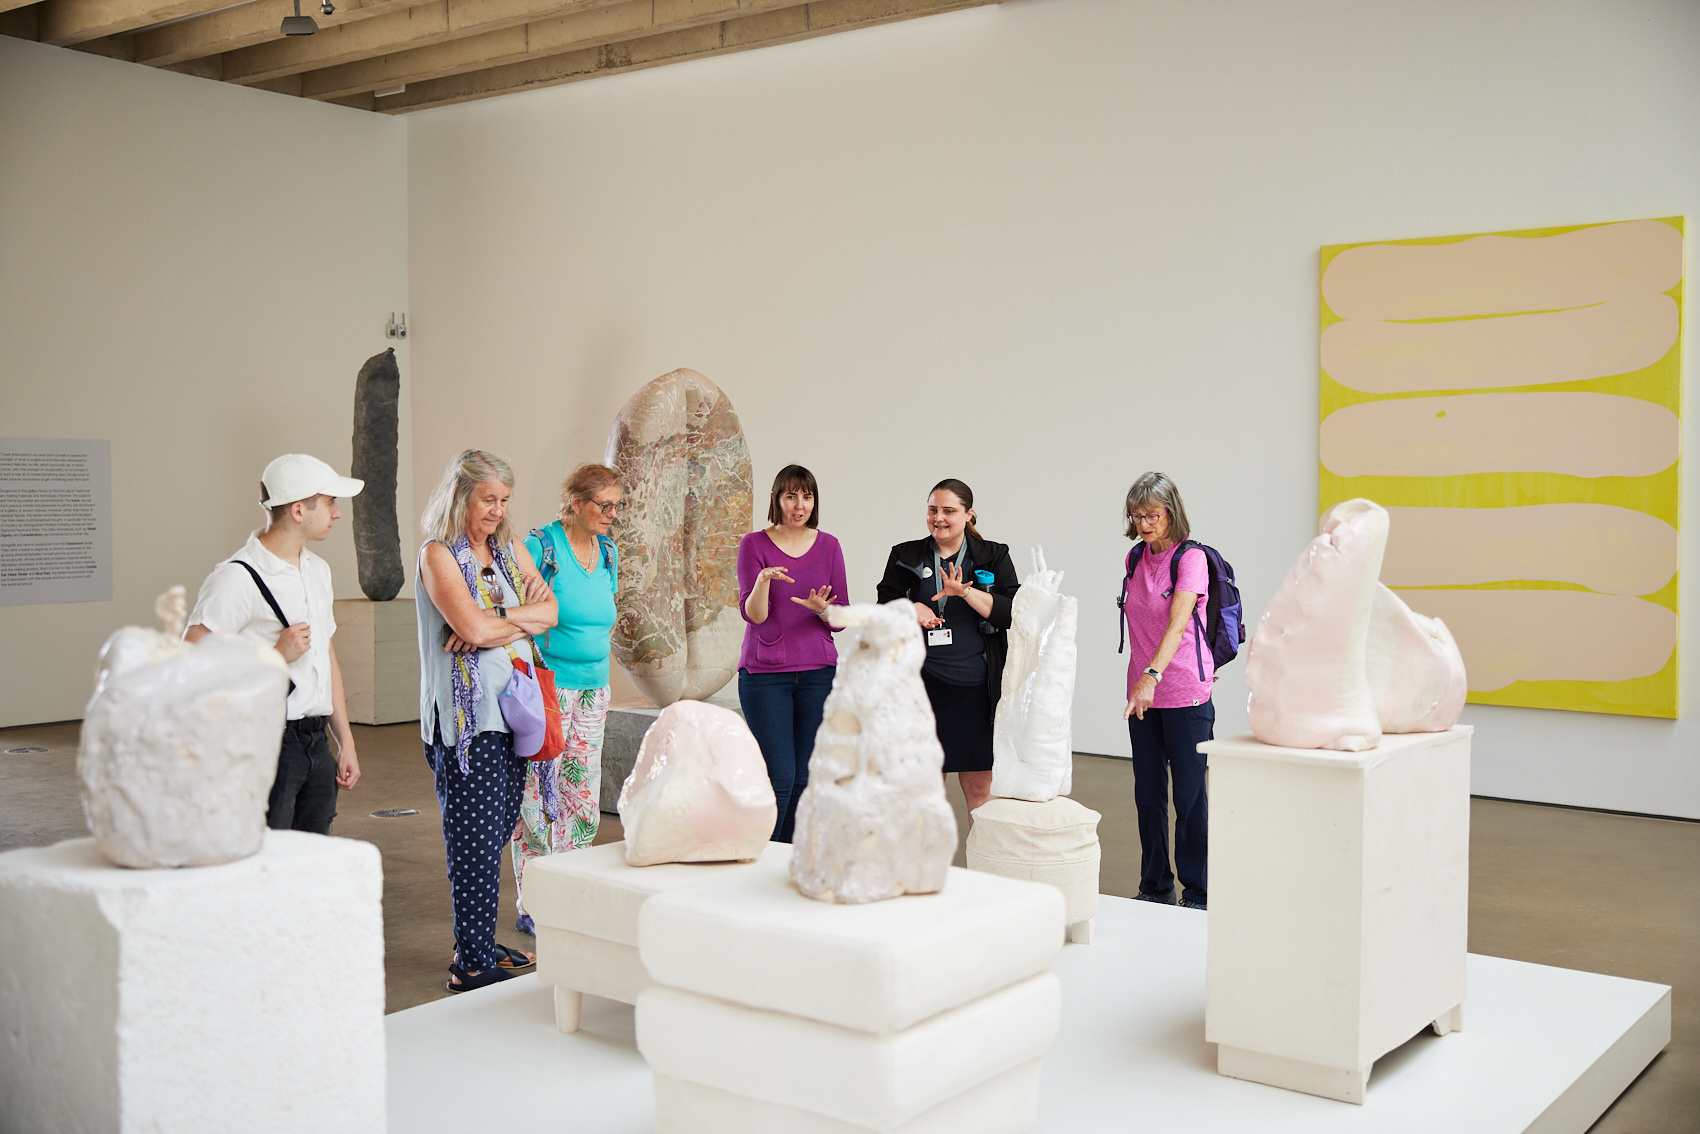 A group of people looking at abstract sculptures on plinths in a gallery space